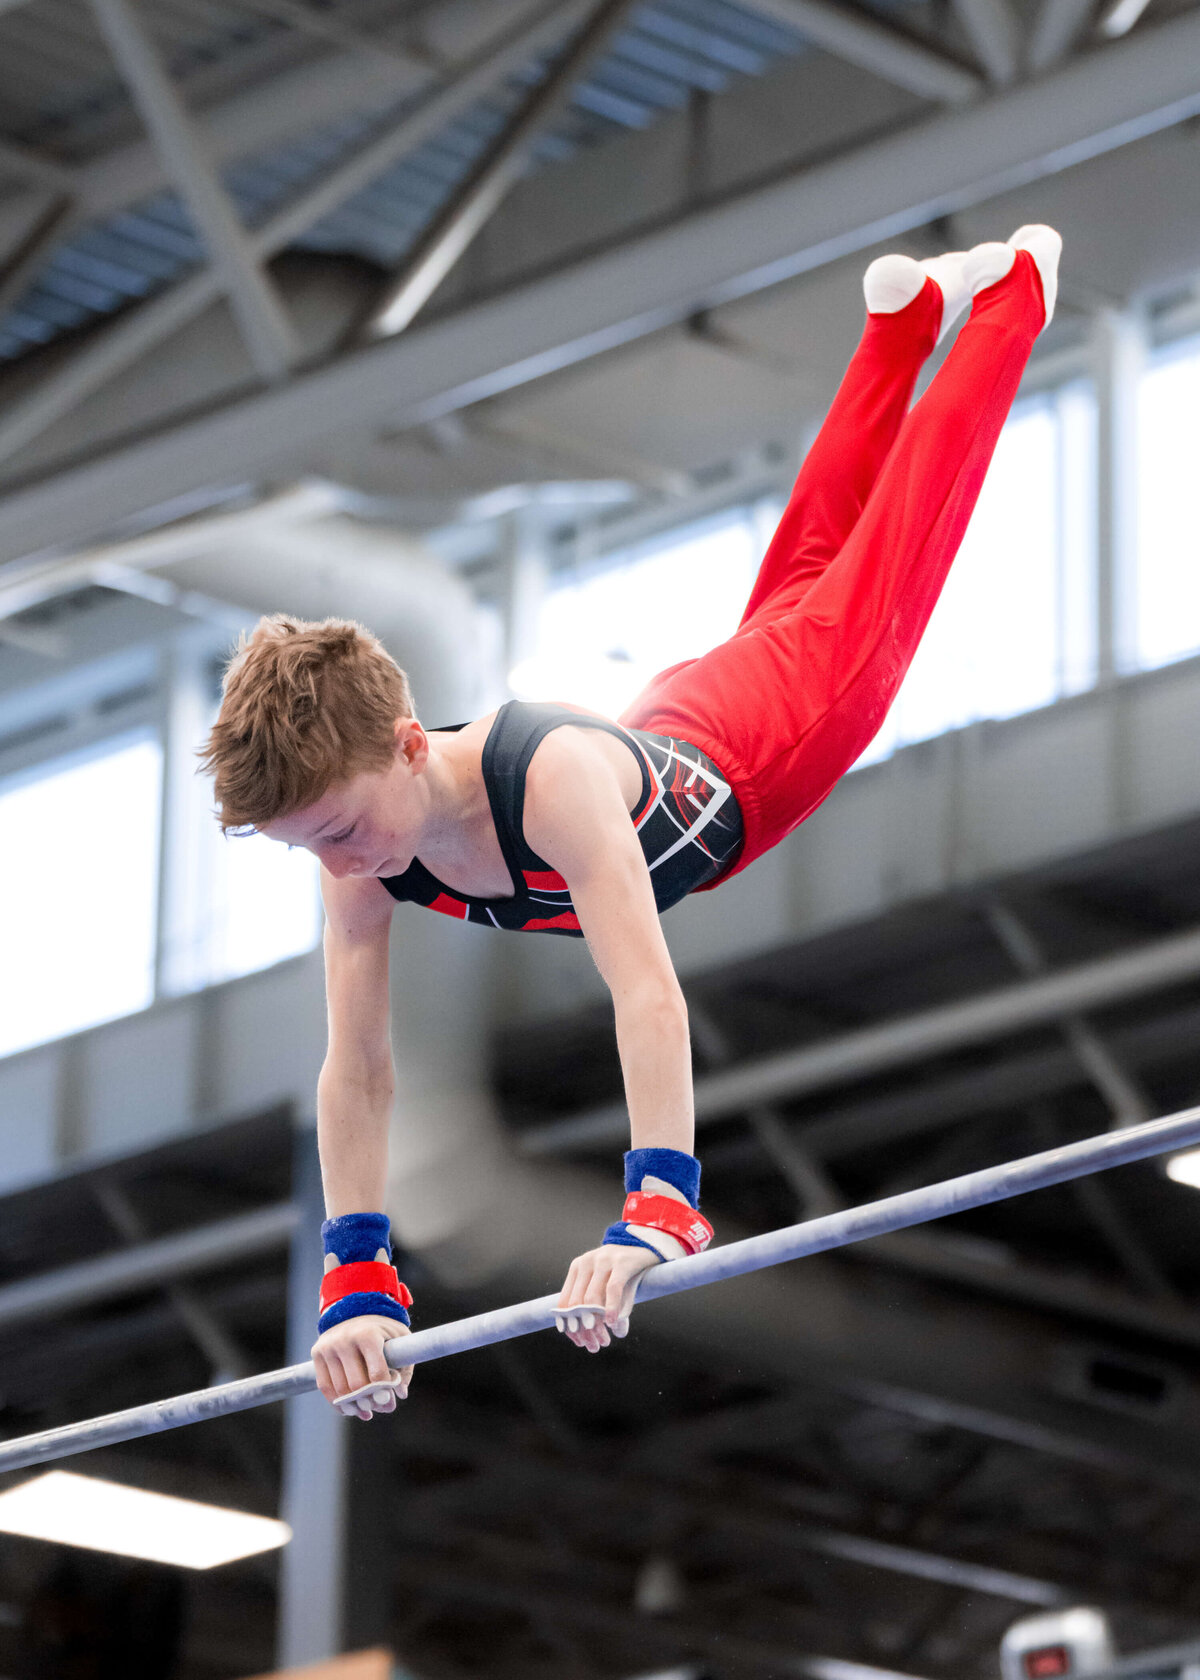 Photo by Luke O'Geil taken at the 2023 inaugural Grizzly Classic men's artistic gymnastics competitionA1_09256